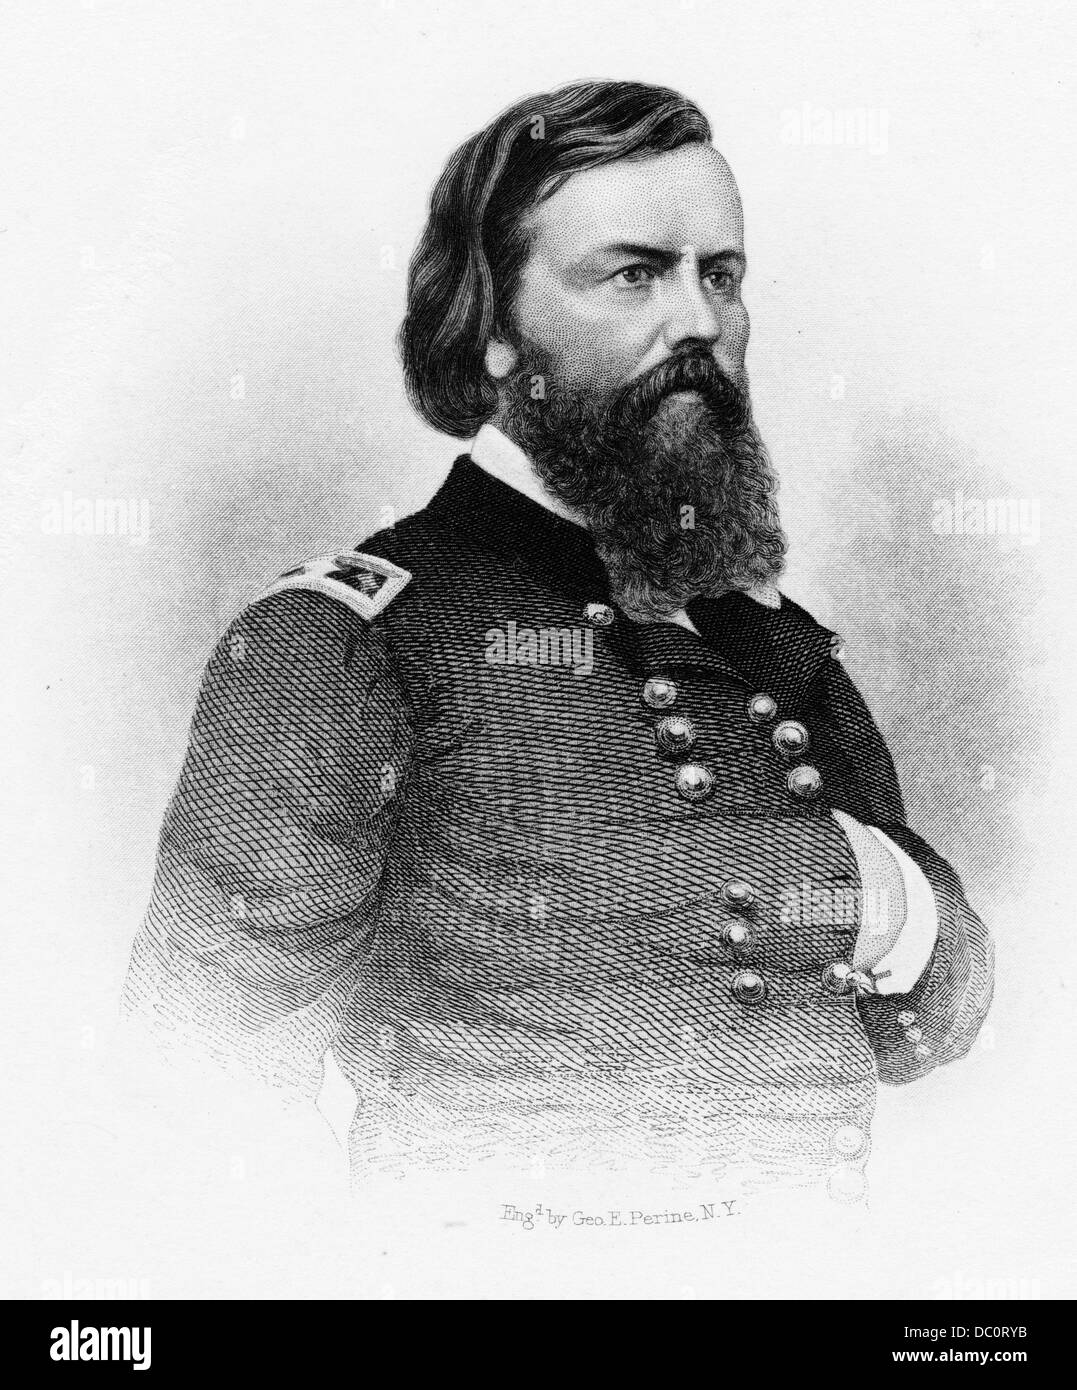 1800s 1860s MAJOR JOHN POPE UNION OFFICER DURING AMERICAN CIVIL WAR ALSO SAW SERVICE IN DAKOTA AND APACHE WARS Stock Photo